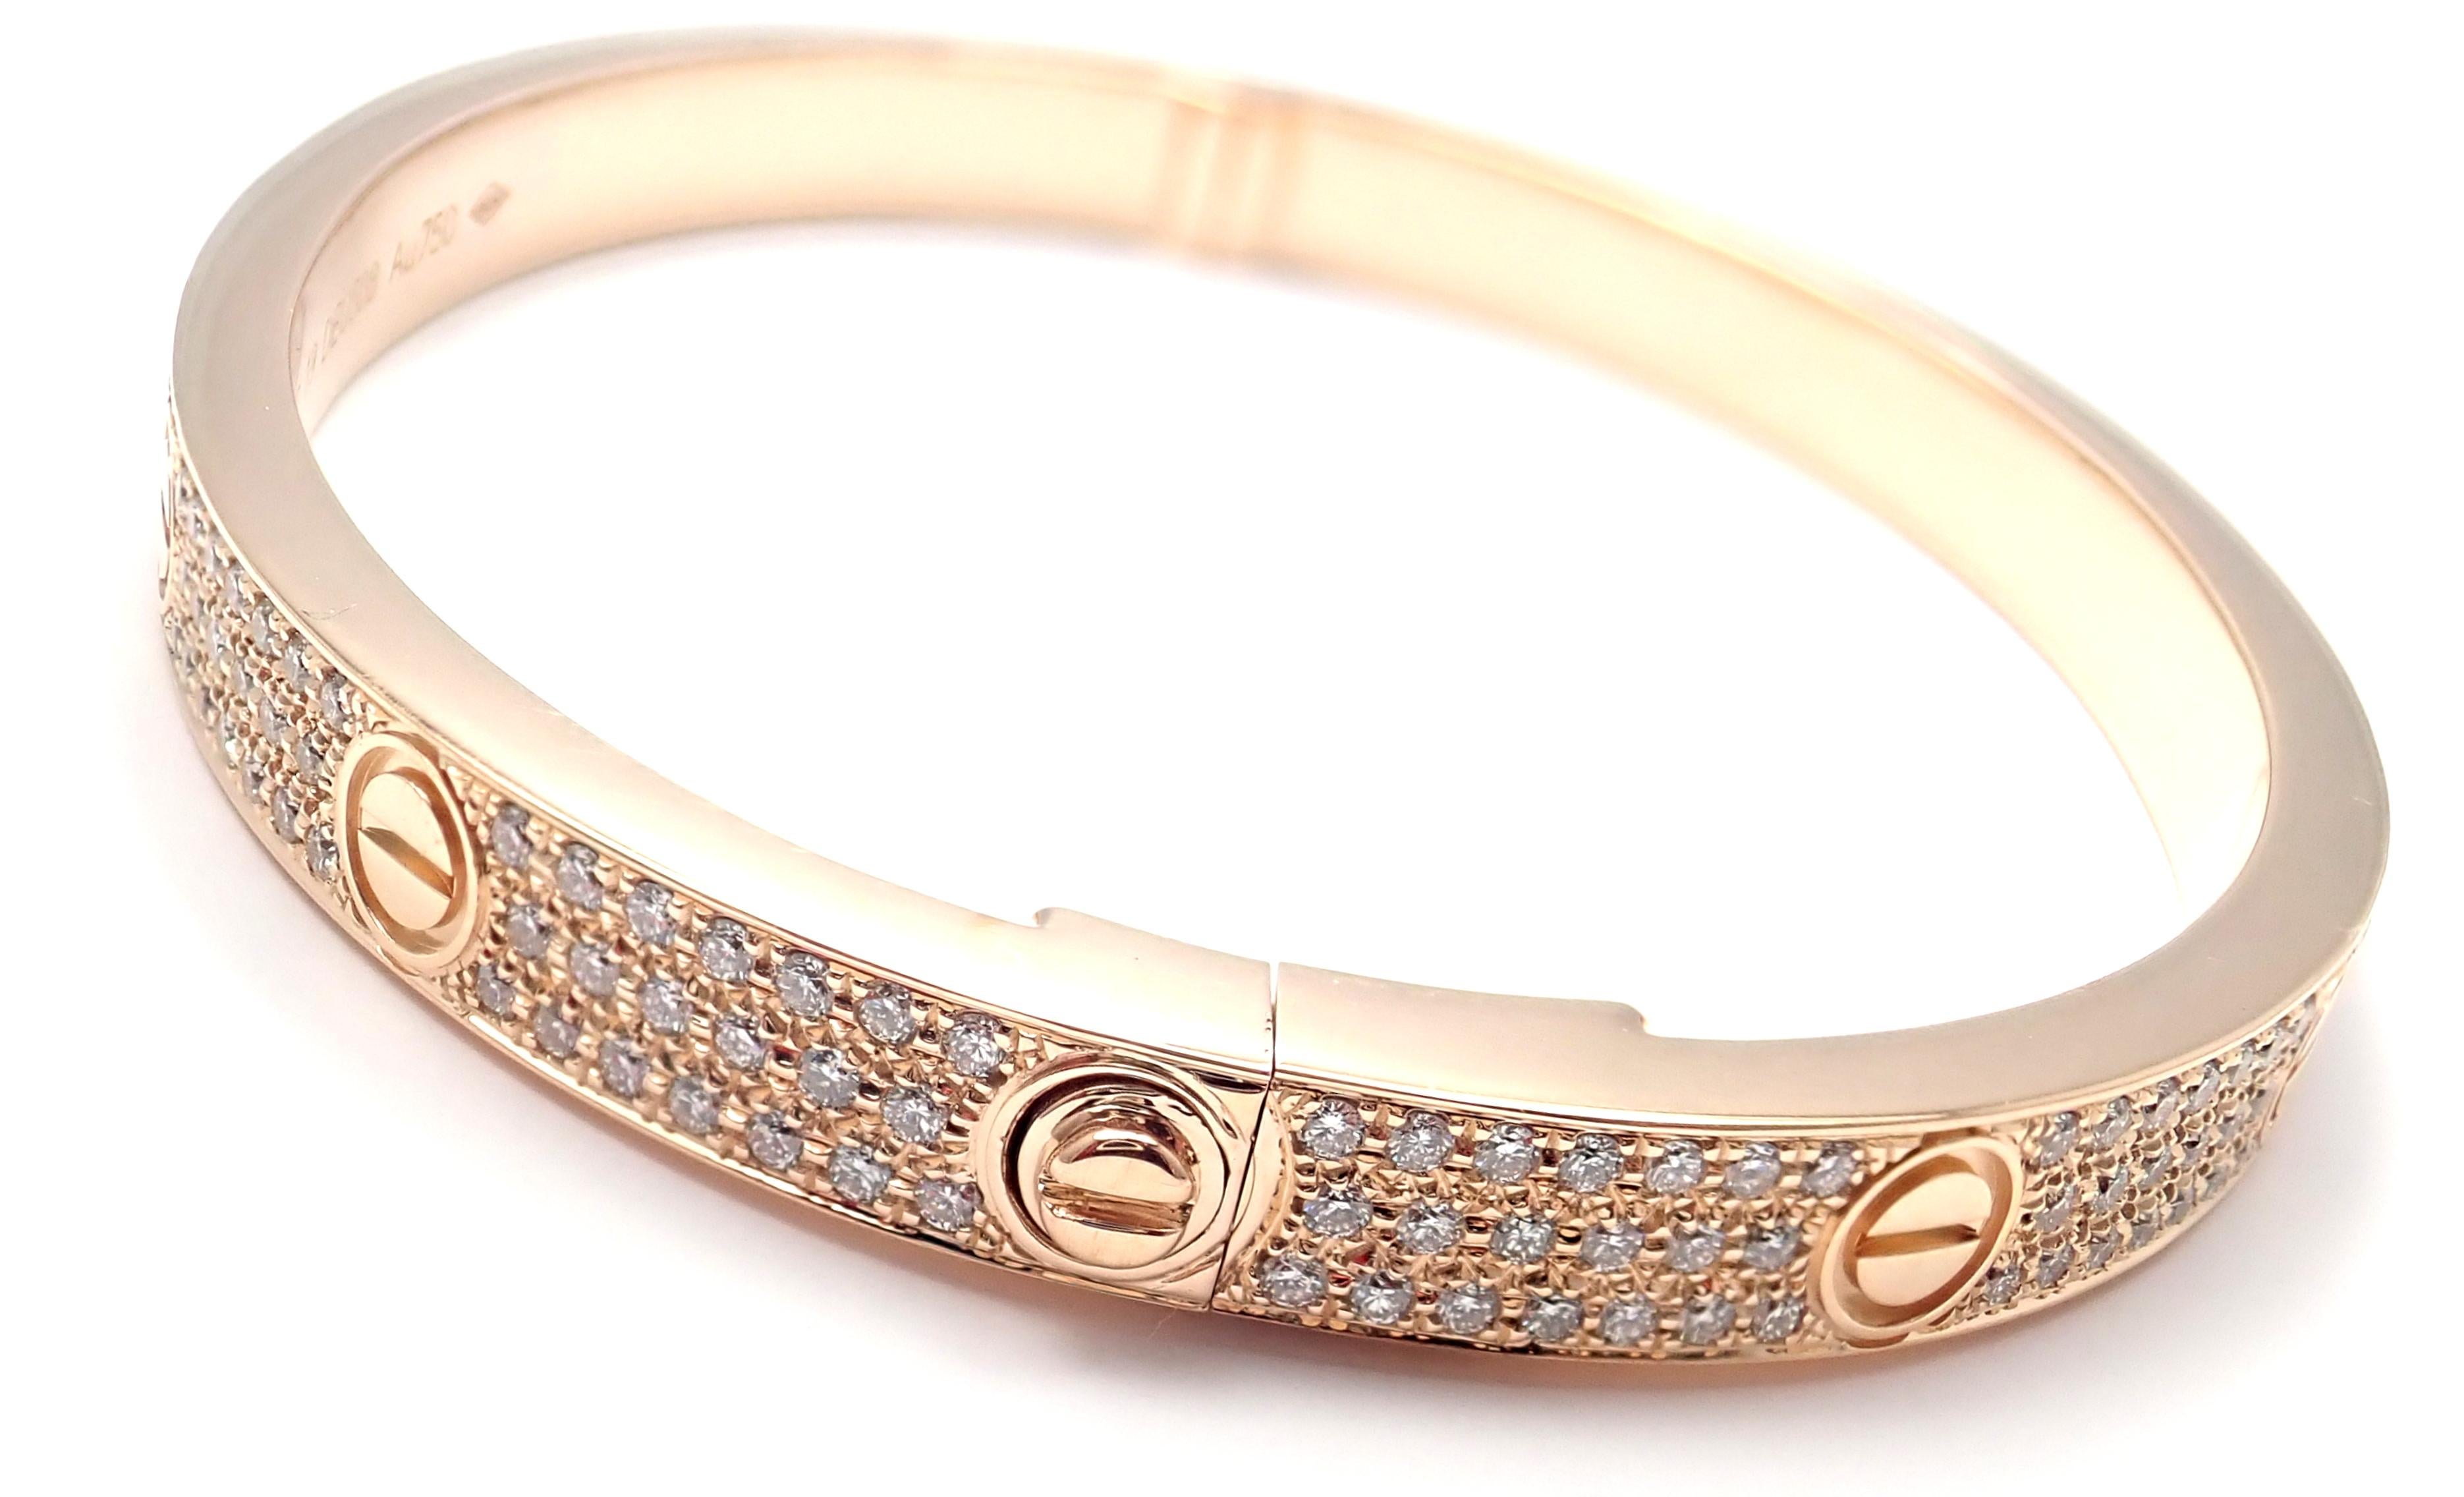 18k Rose Gold Diamond Paved LOVE Bangle Bracelet by Cartier. 
SIZE 19. 
With 204 brilliant cut VS1 clarity, E color diamonds totaling 2 carats.
This bracelet comes with Cartier box & Cartier certificate of authenticity and a sales receipt.
Retail